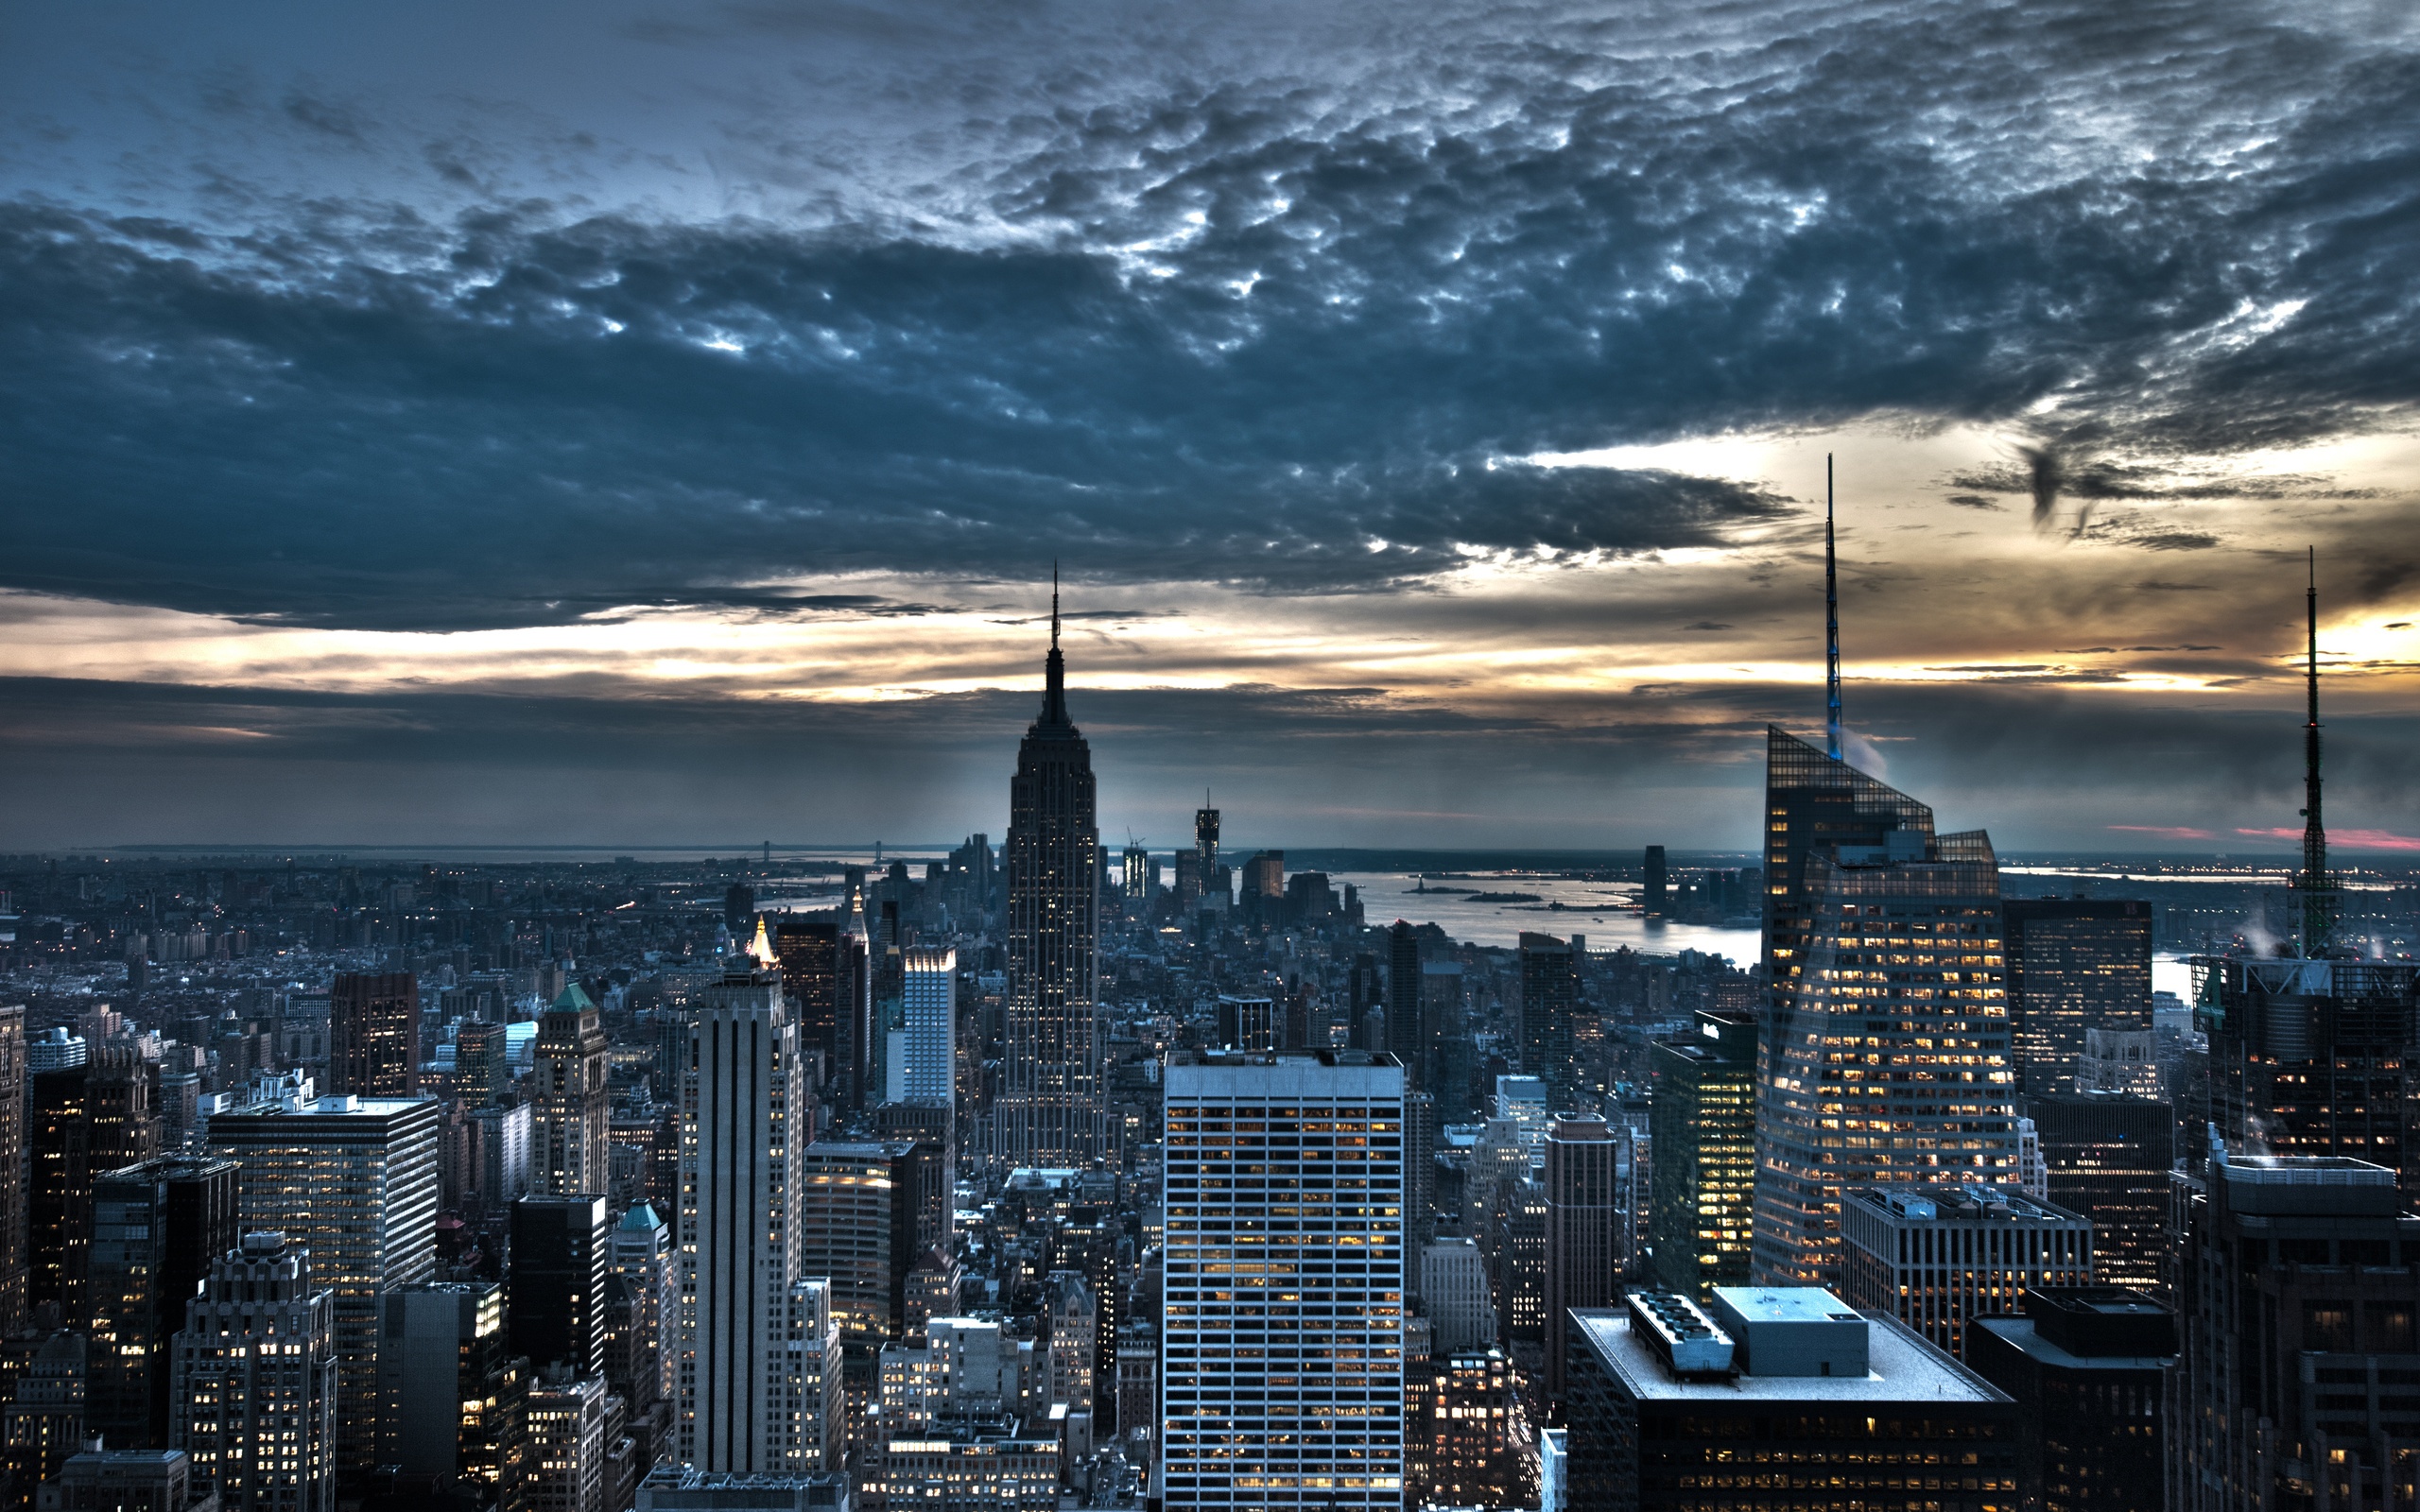 Empire State Building New York City Wallpapers   2560x1600   1542798 2560x1600